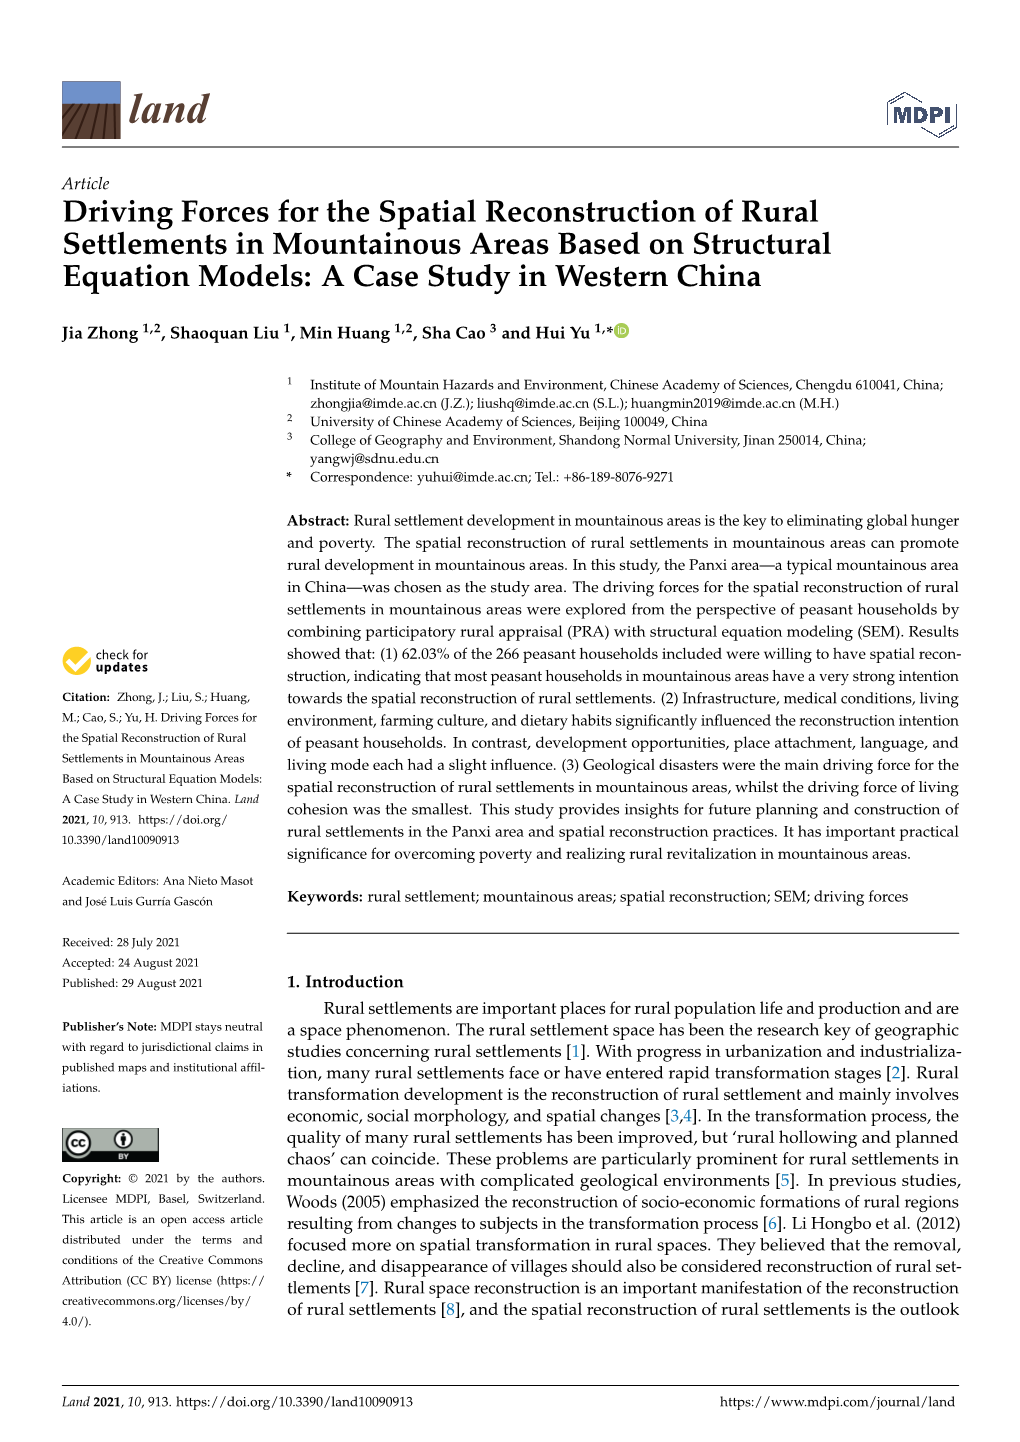 Driving Forces for the Spatial Reconstruction of Rural Settlements in Mountainous Areas Based on Structural Equation Models: a Case Study in Western China